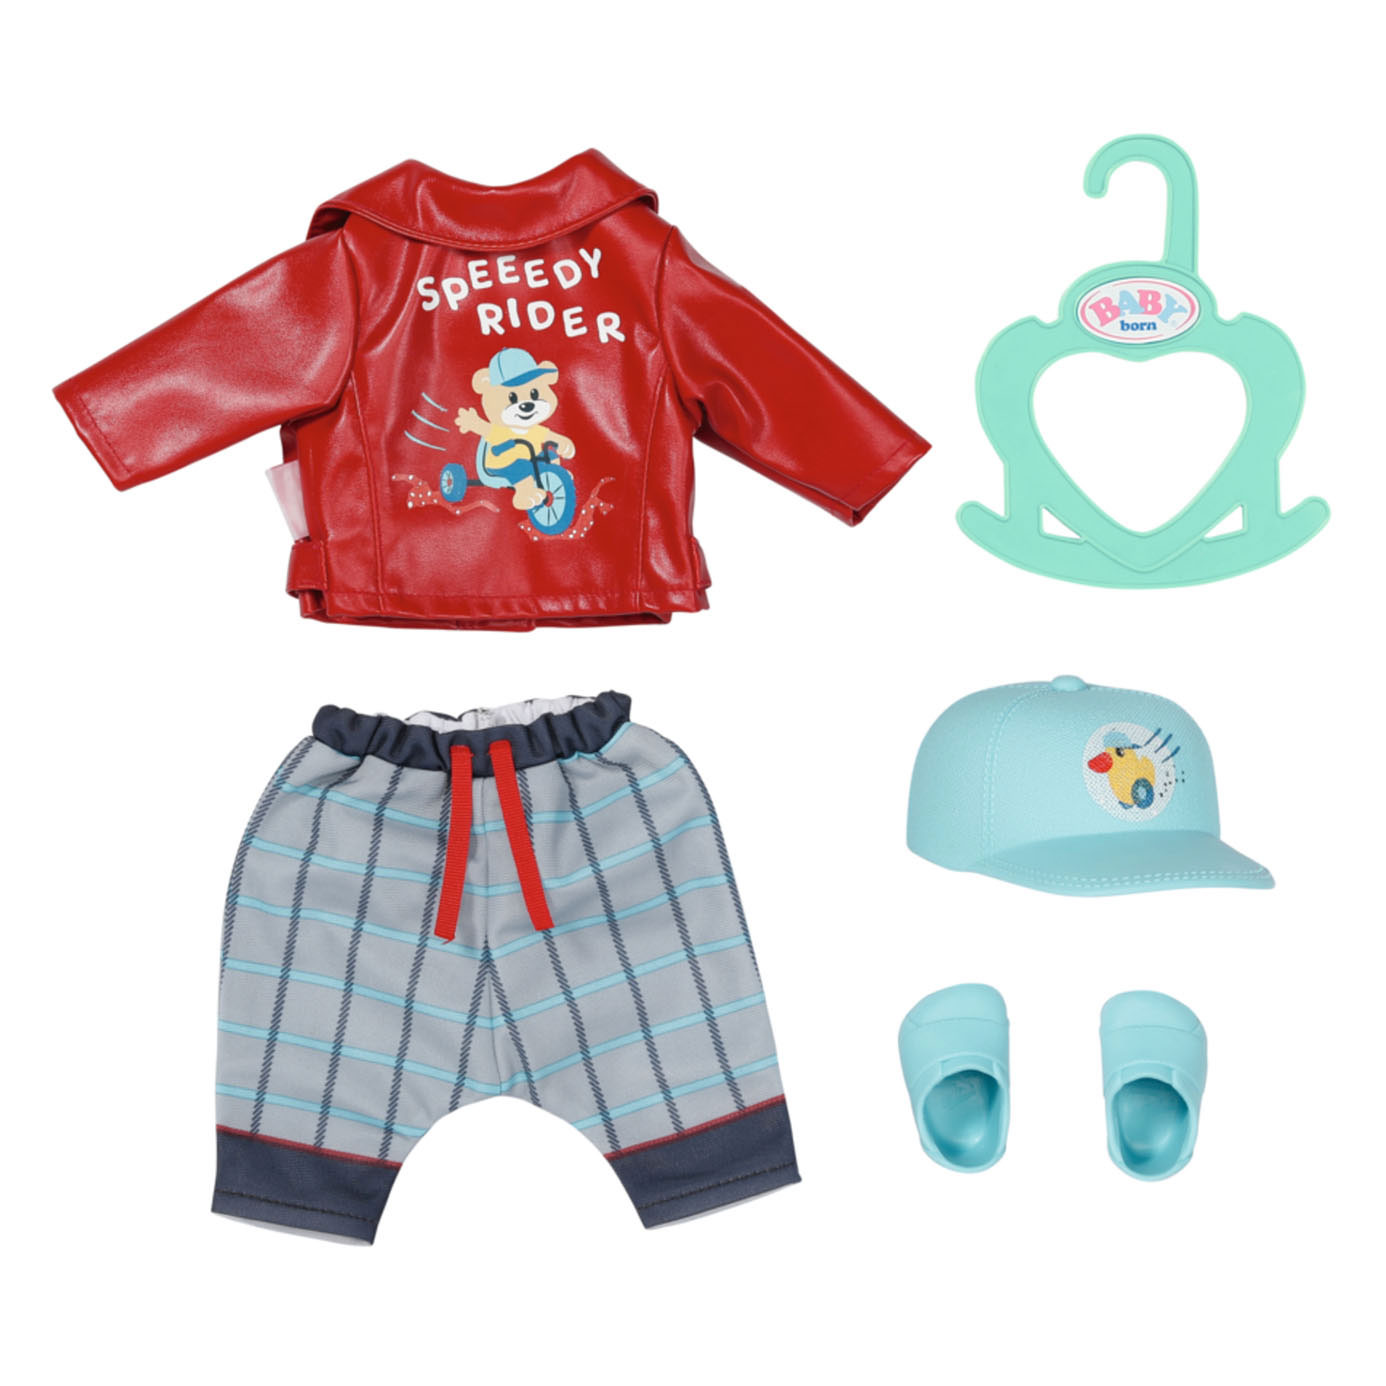 BABY born Little Cool Kids-Outfit, 36 cm